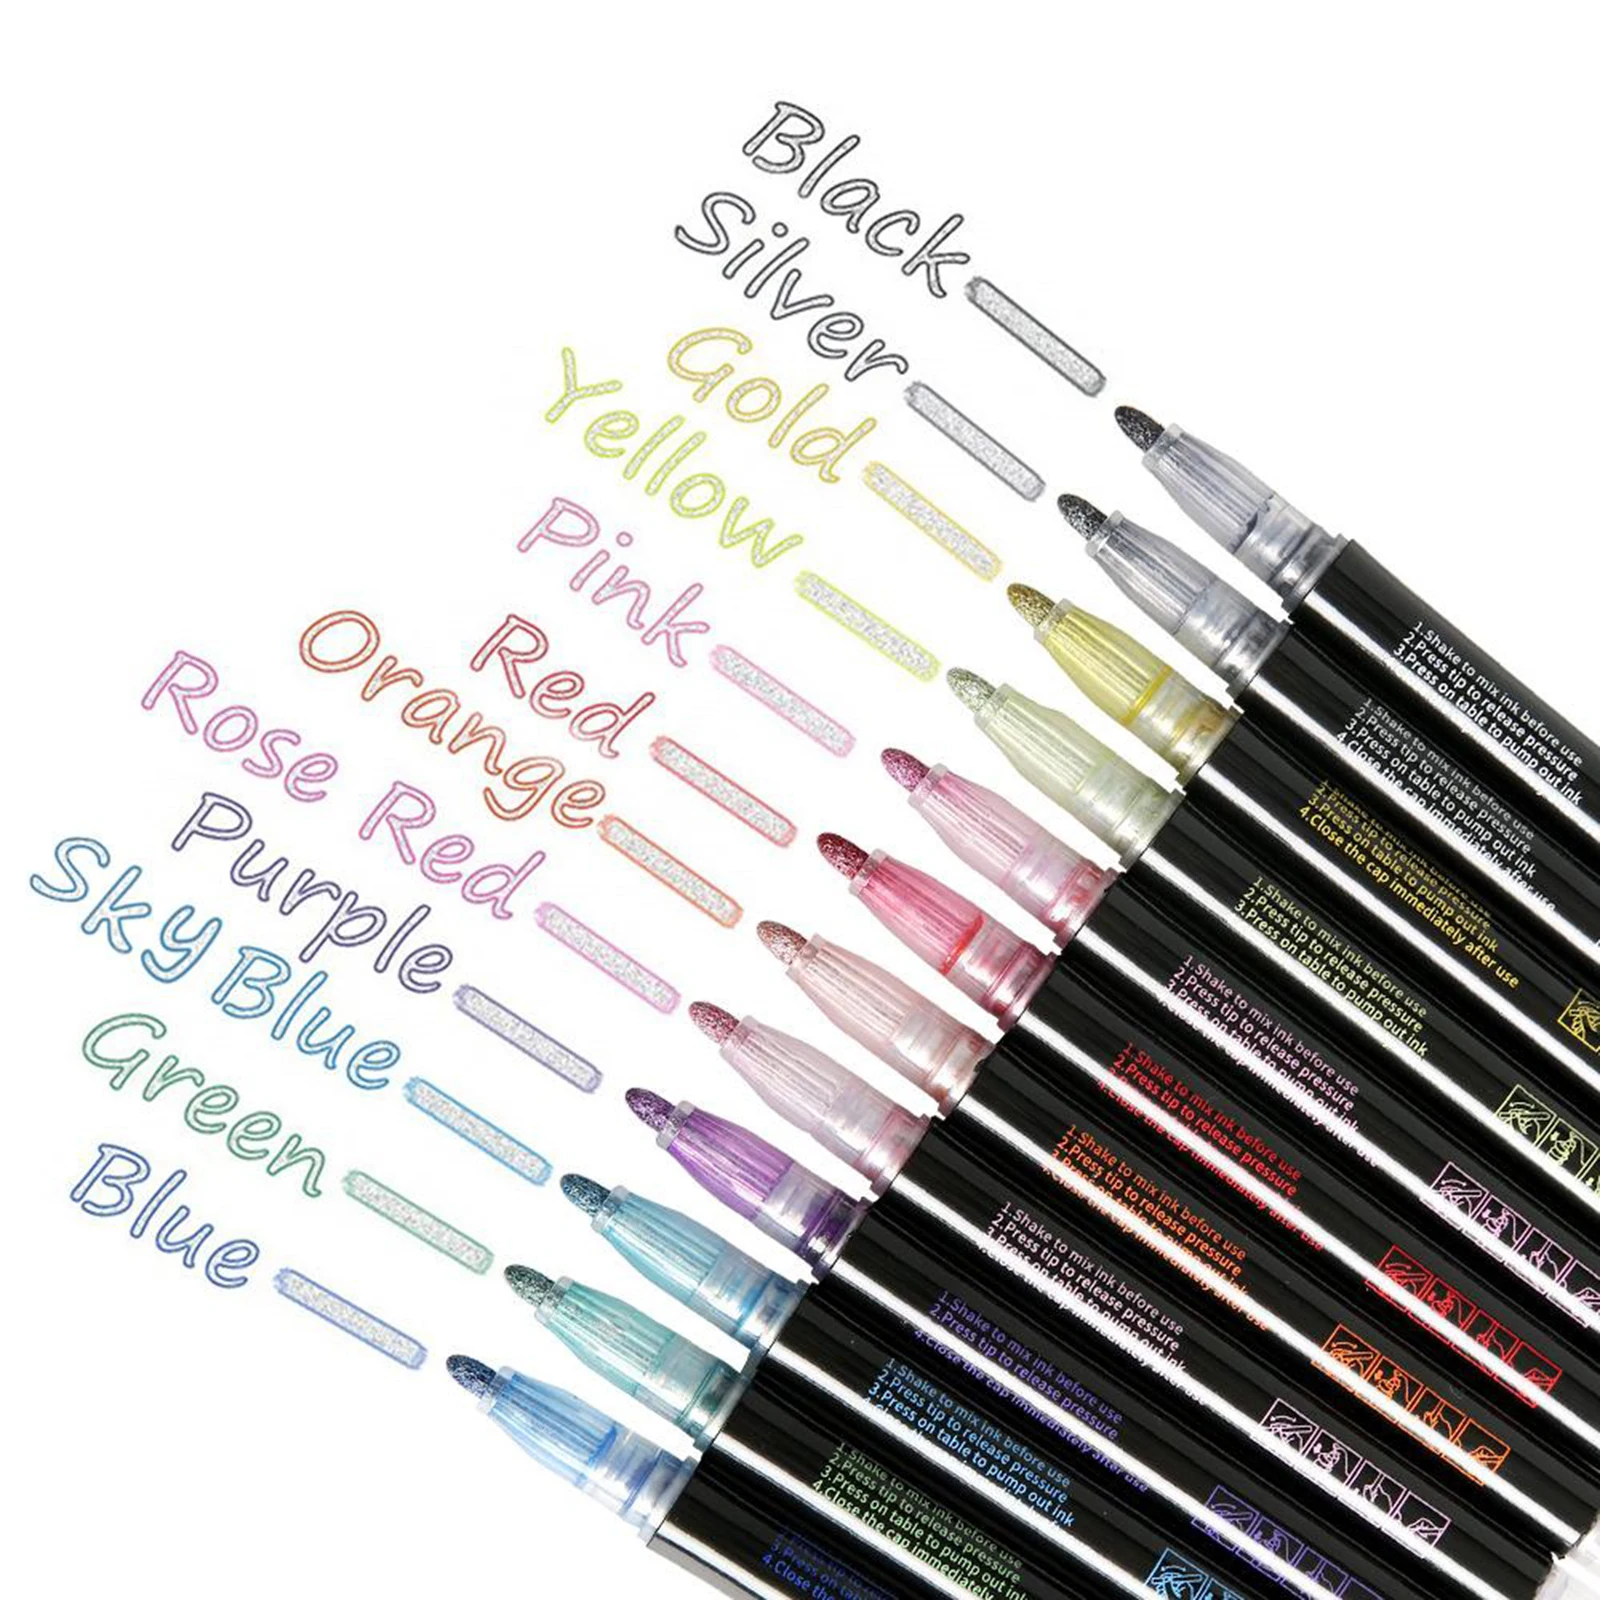 12 Colors Self Outline Metallic Markers Permanent Marker Pens Craft Markers Set